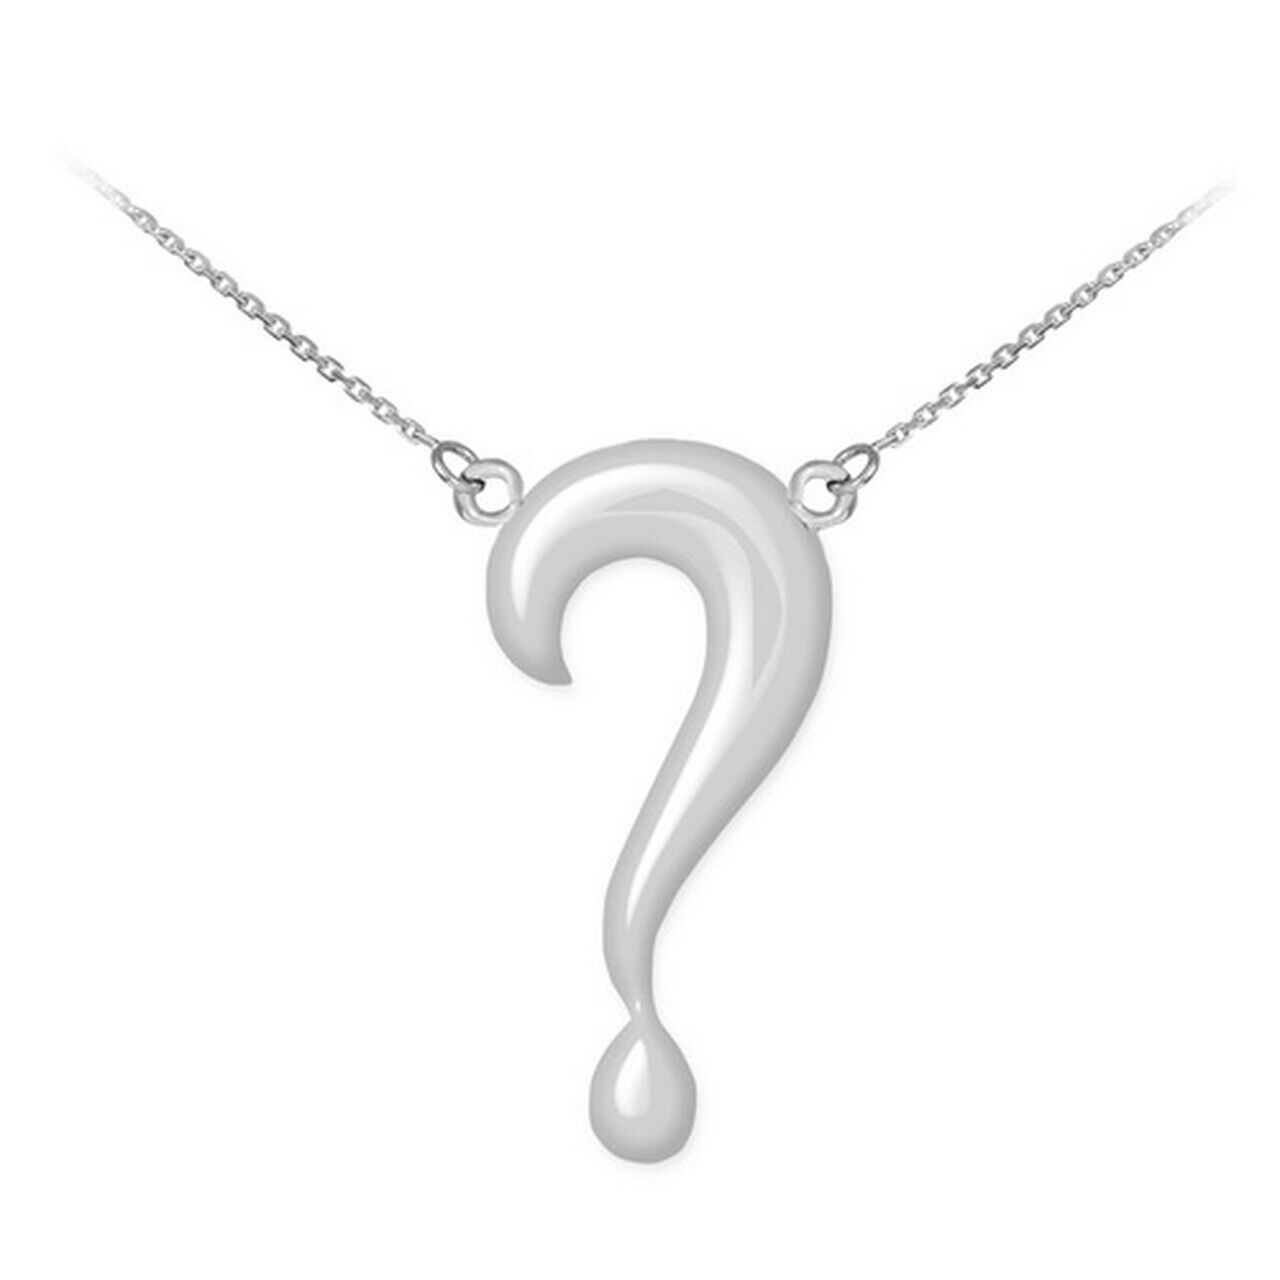 Women's 925 Sterling Silver Question Mark "?" Charm Necklace Made in USA